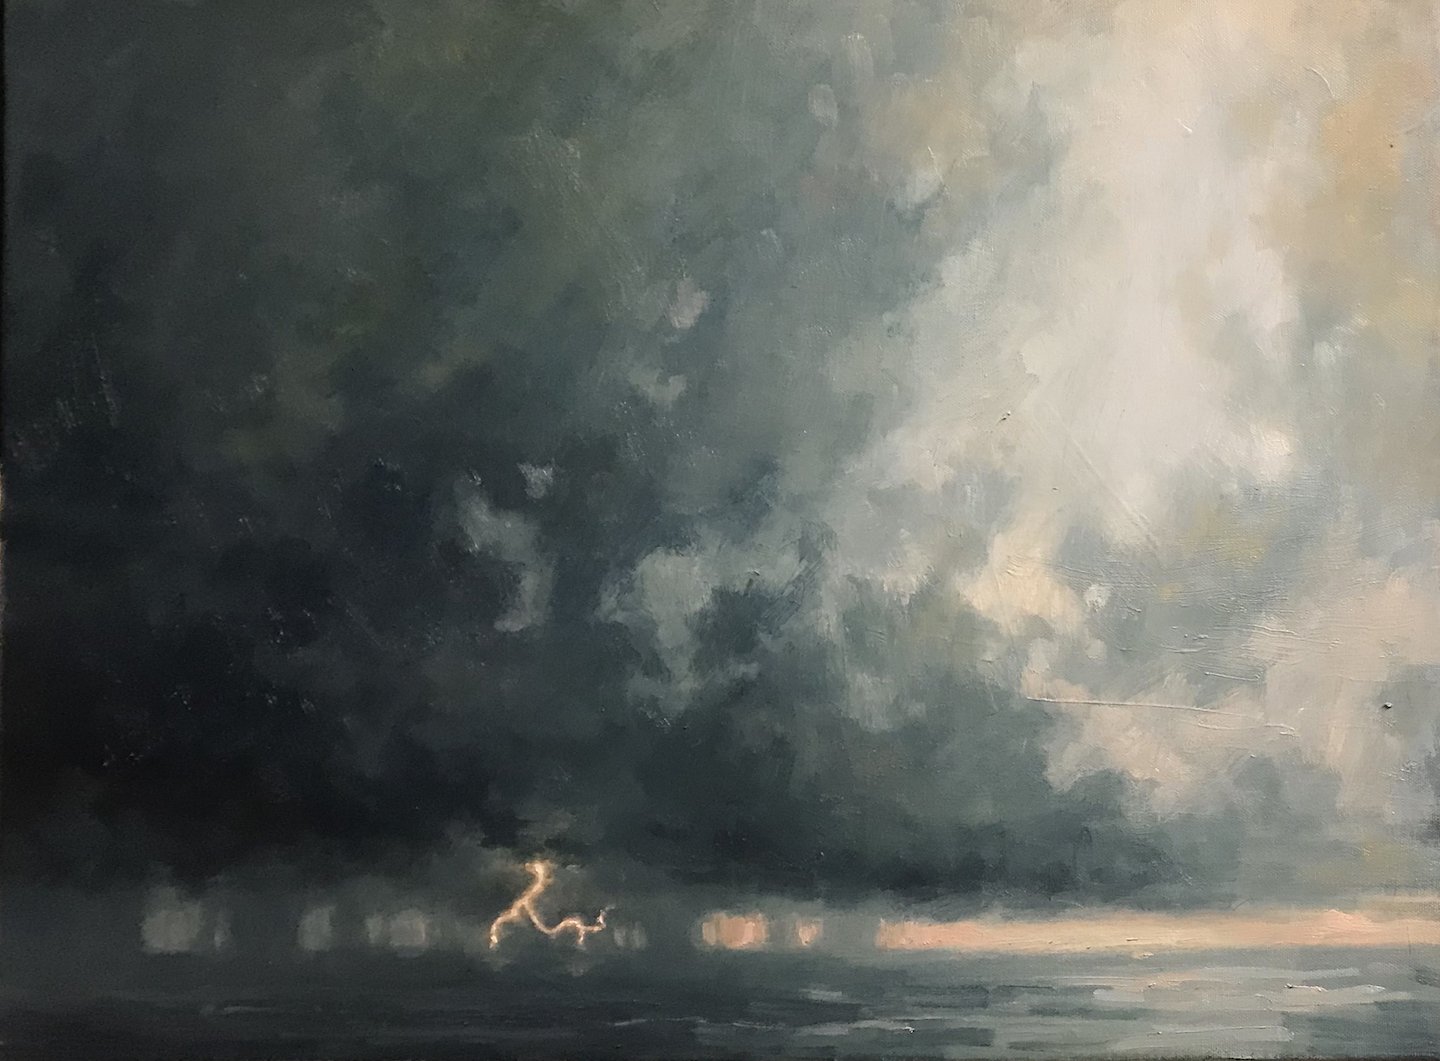    Incoming  , 20” x 24”, oil on canvas 